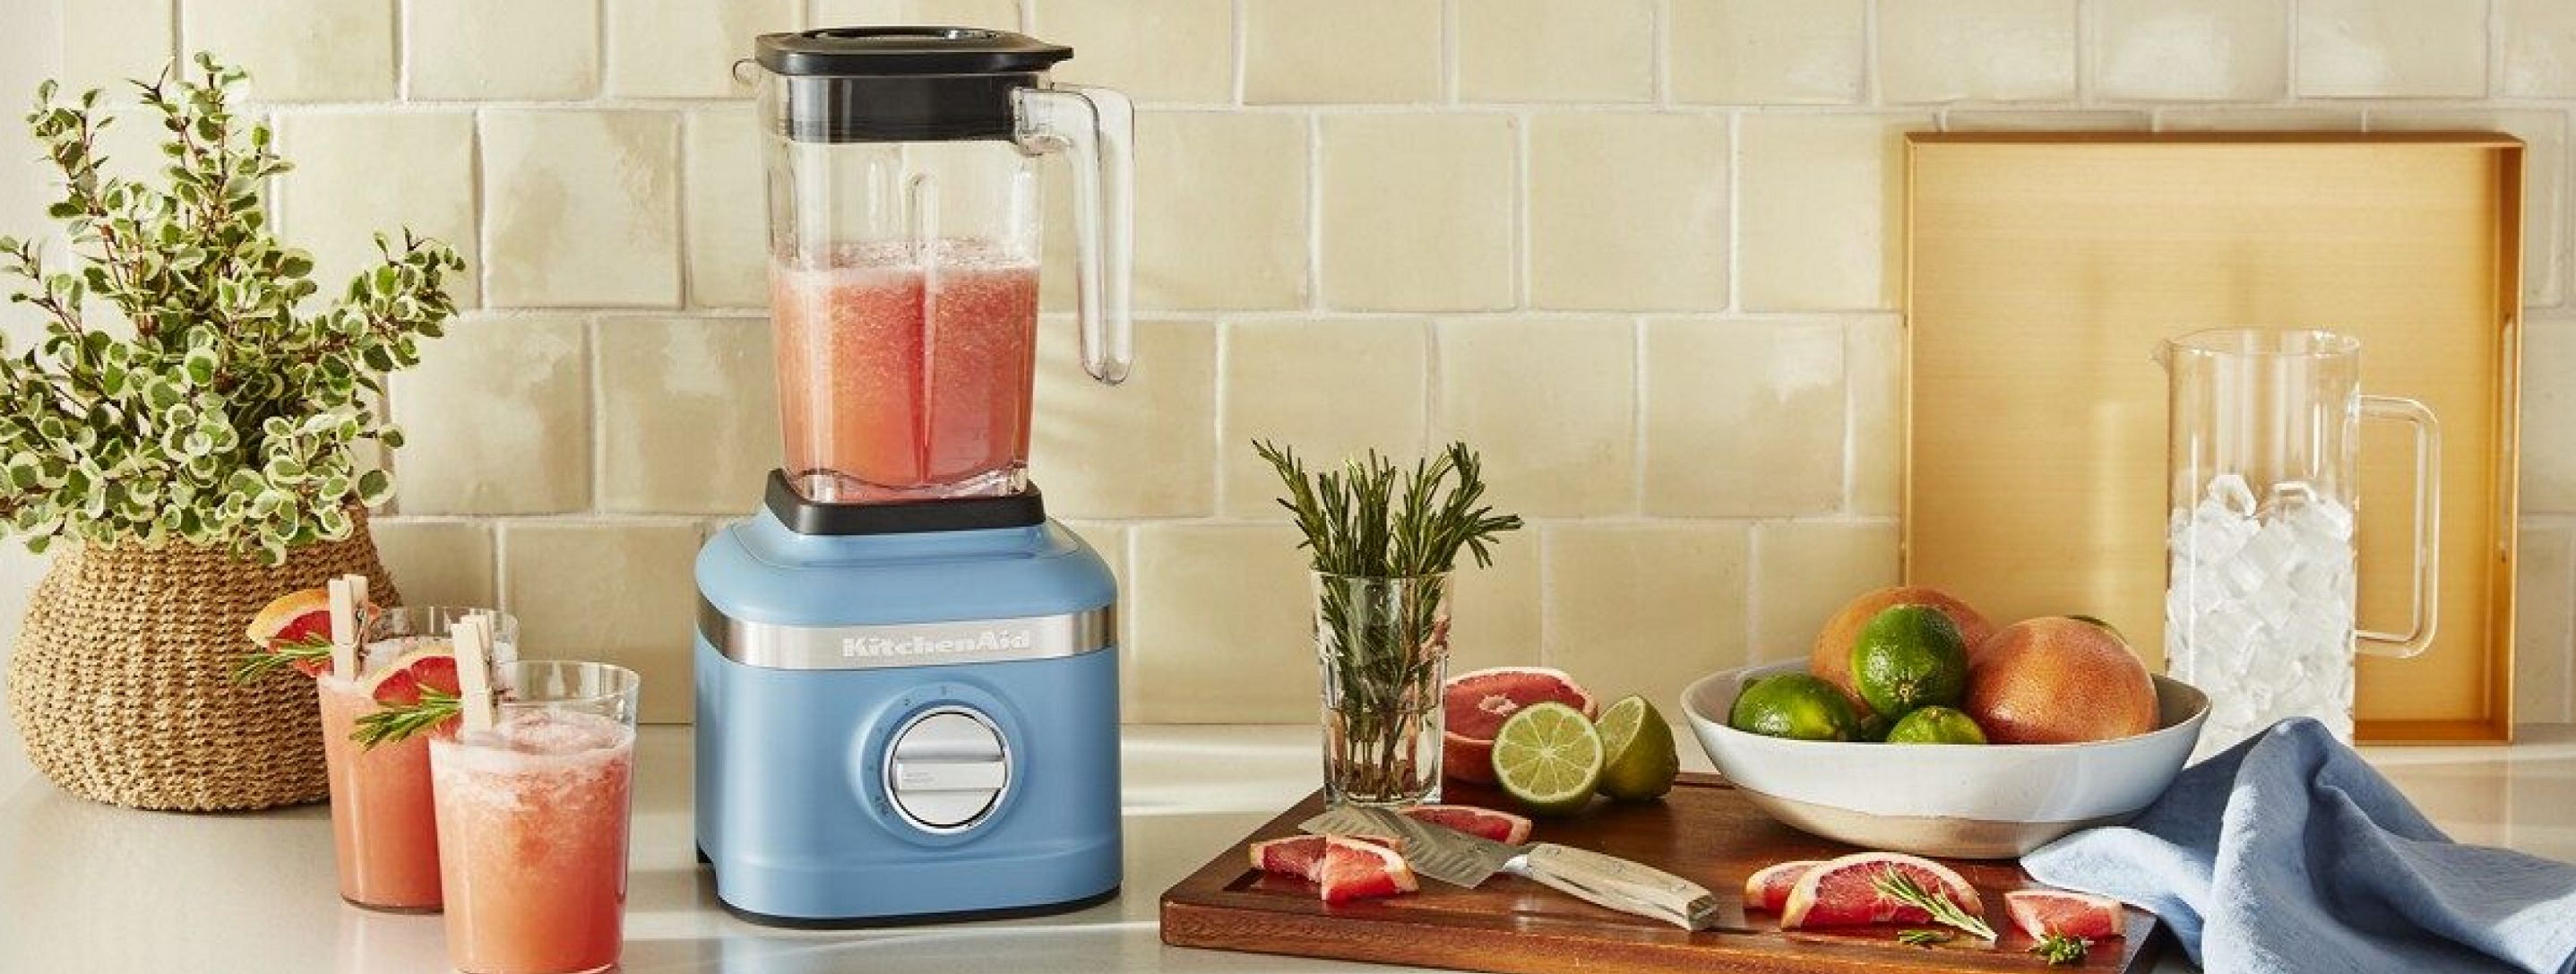 A blue countertop blender surrounded by fruit, cups of juice and an ice pitcher.